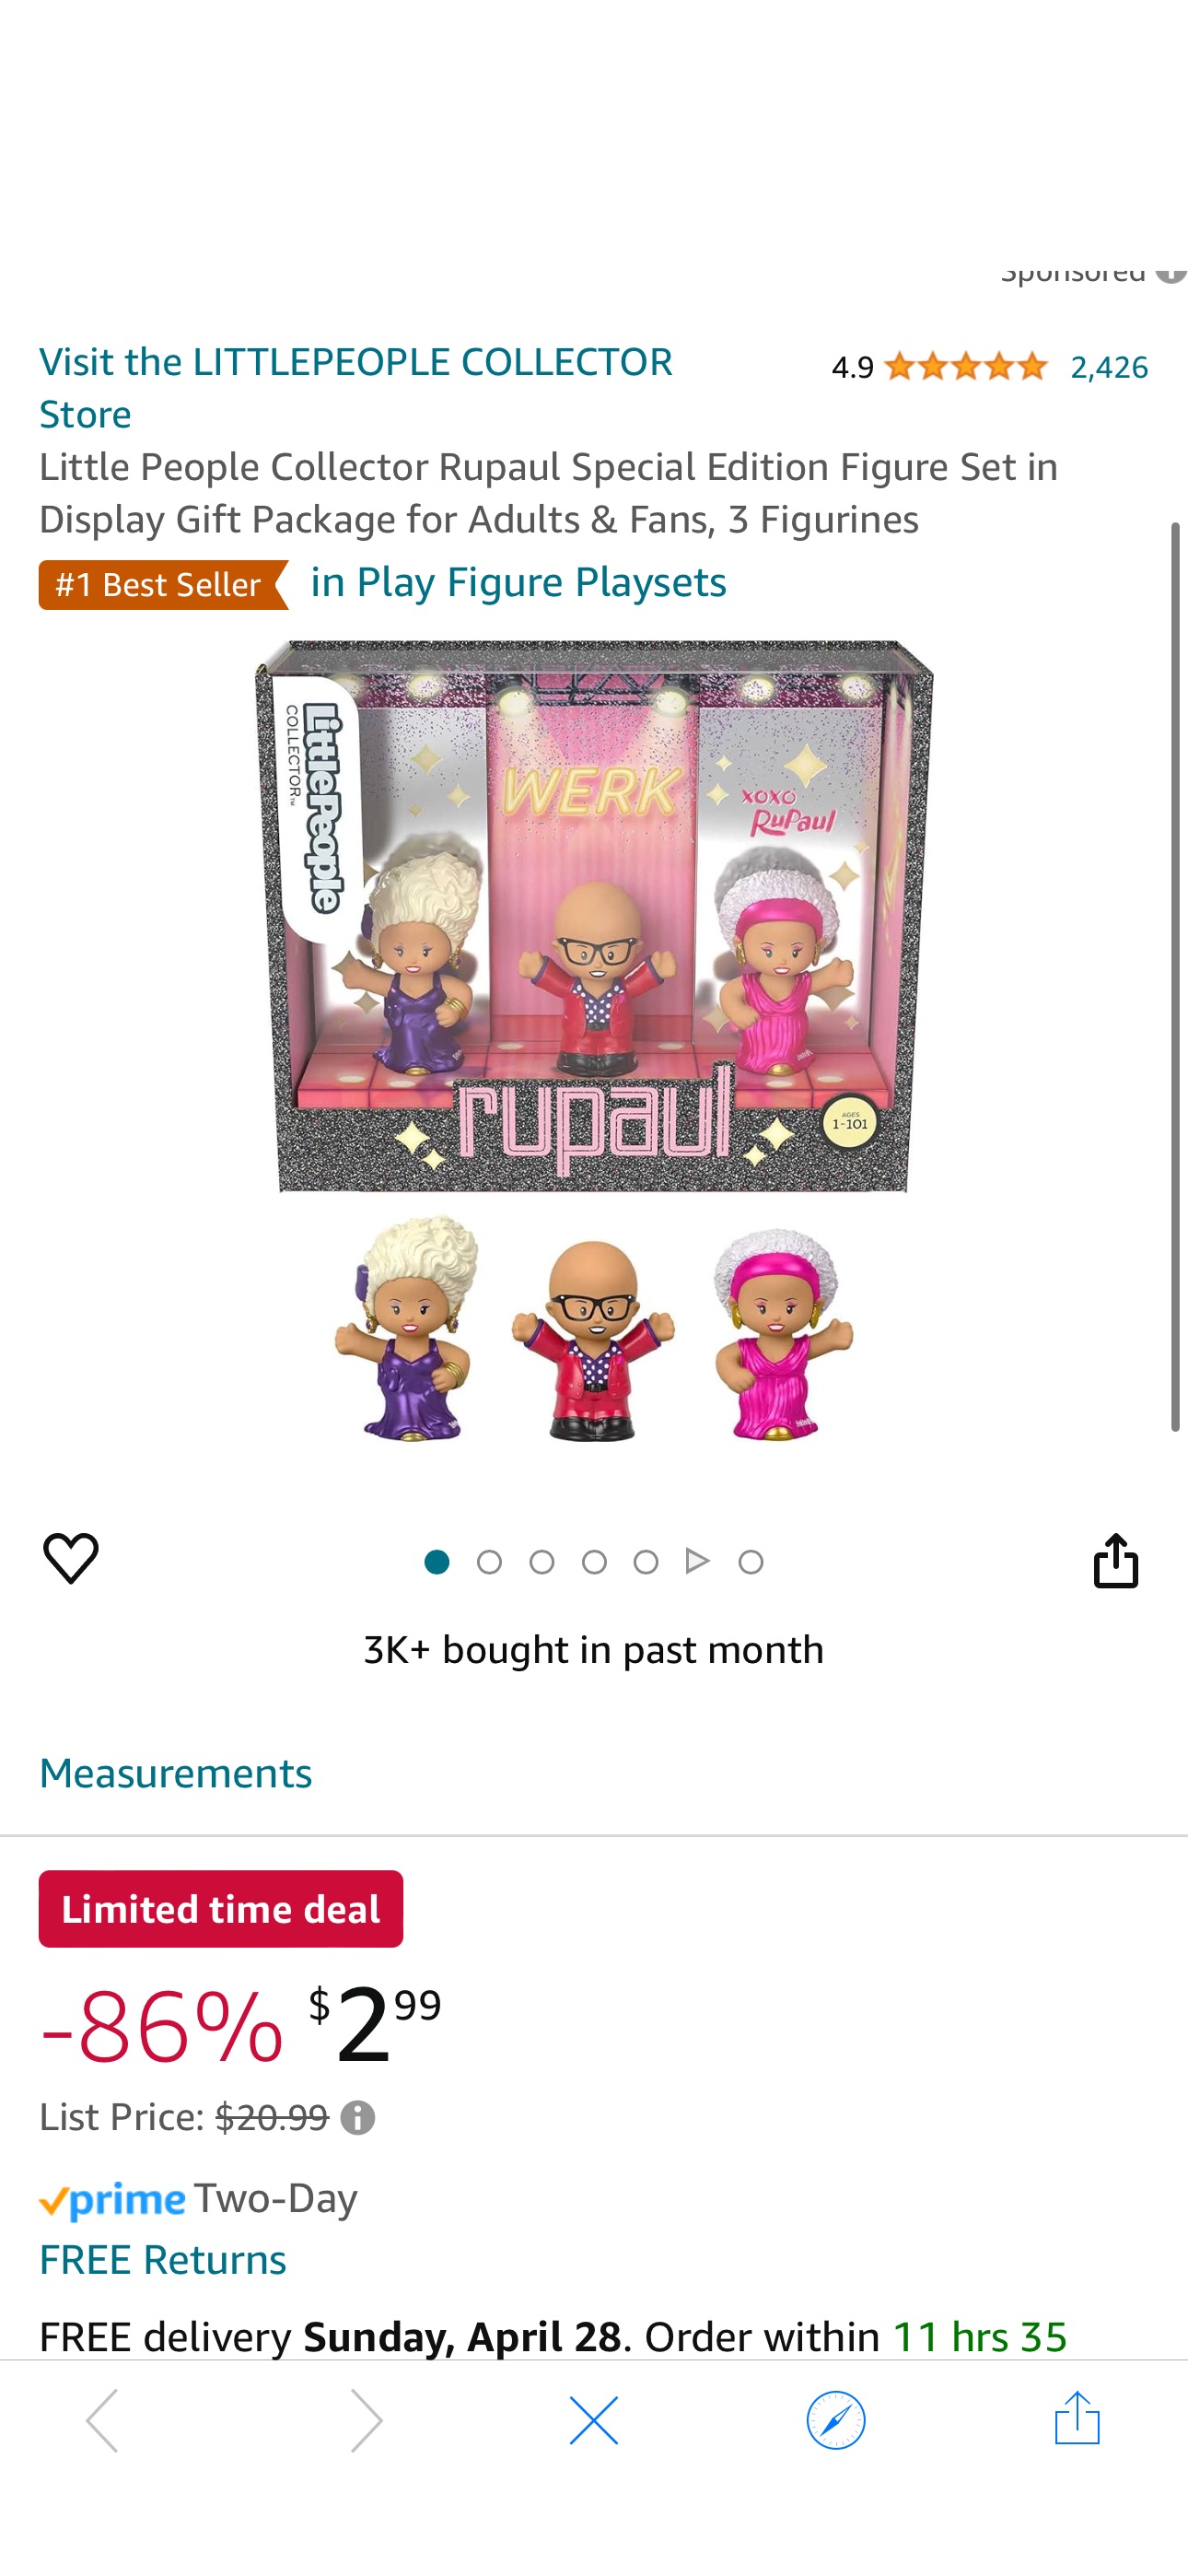 Amazon.com: Little People Collector Rupaul Special Edition Figure Set in Display Gift Package for Adults & Fans, 3 Figurines : RuPaul: Toys & Games